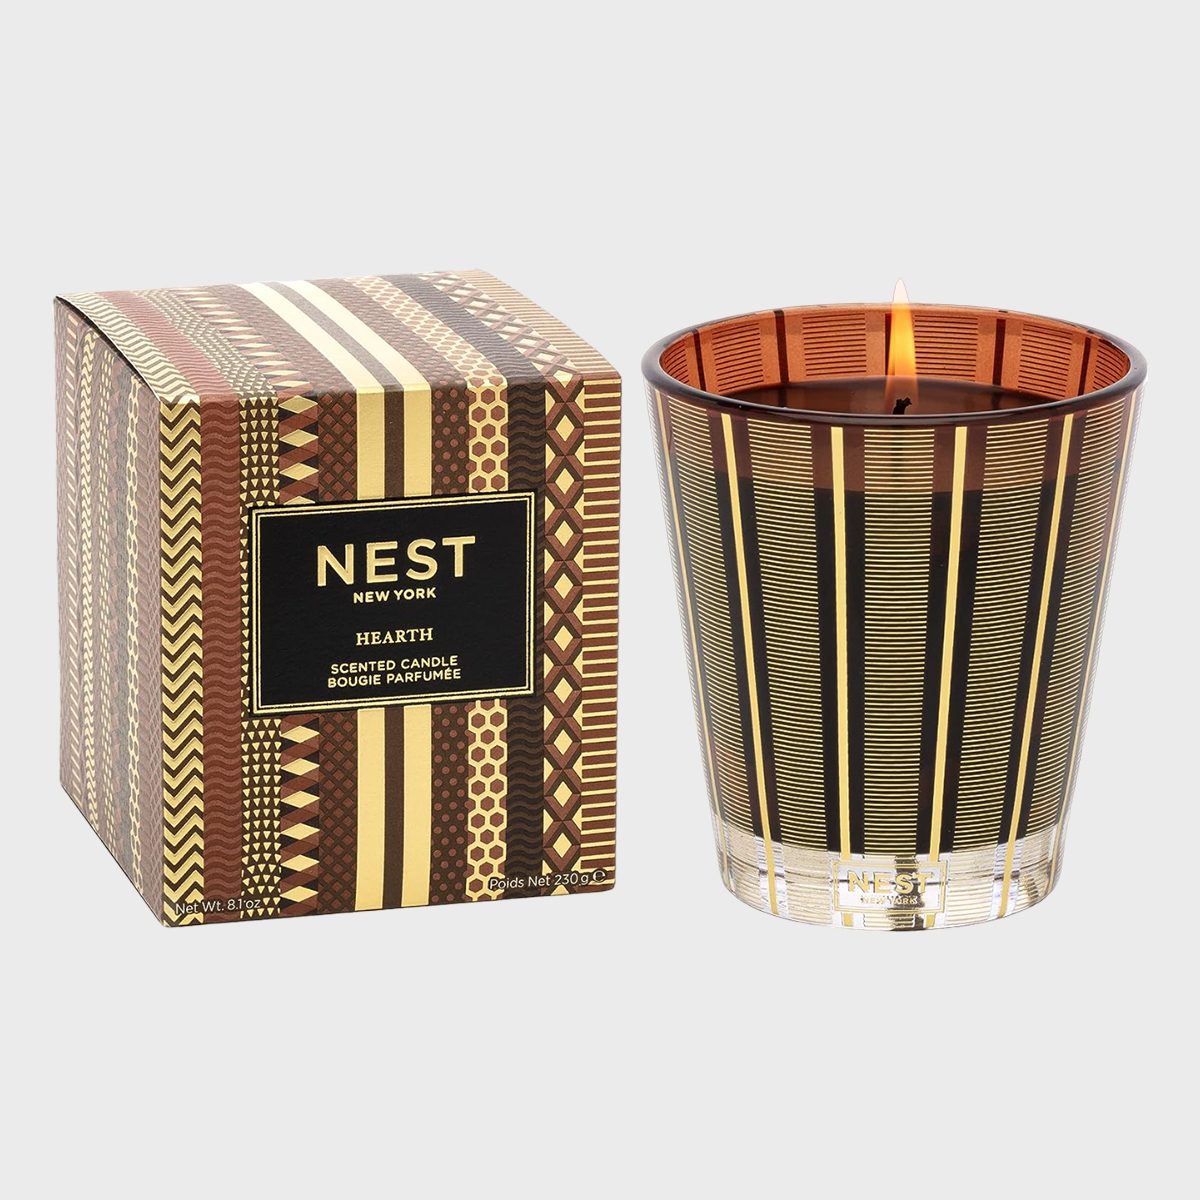 Nest New York Hearth Scented Classic Candle